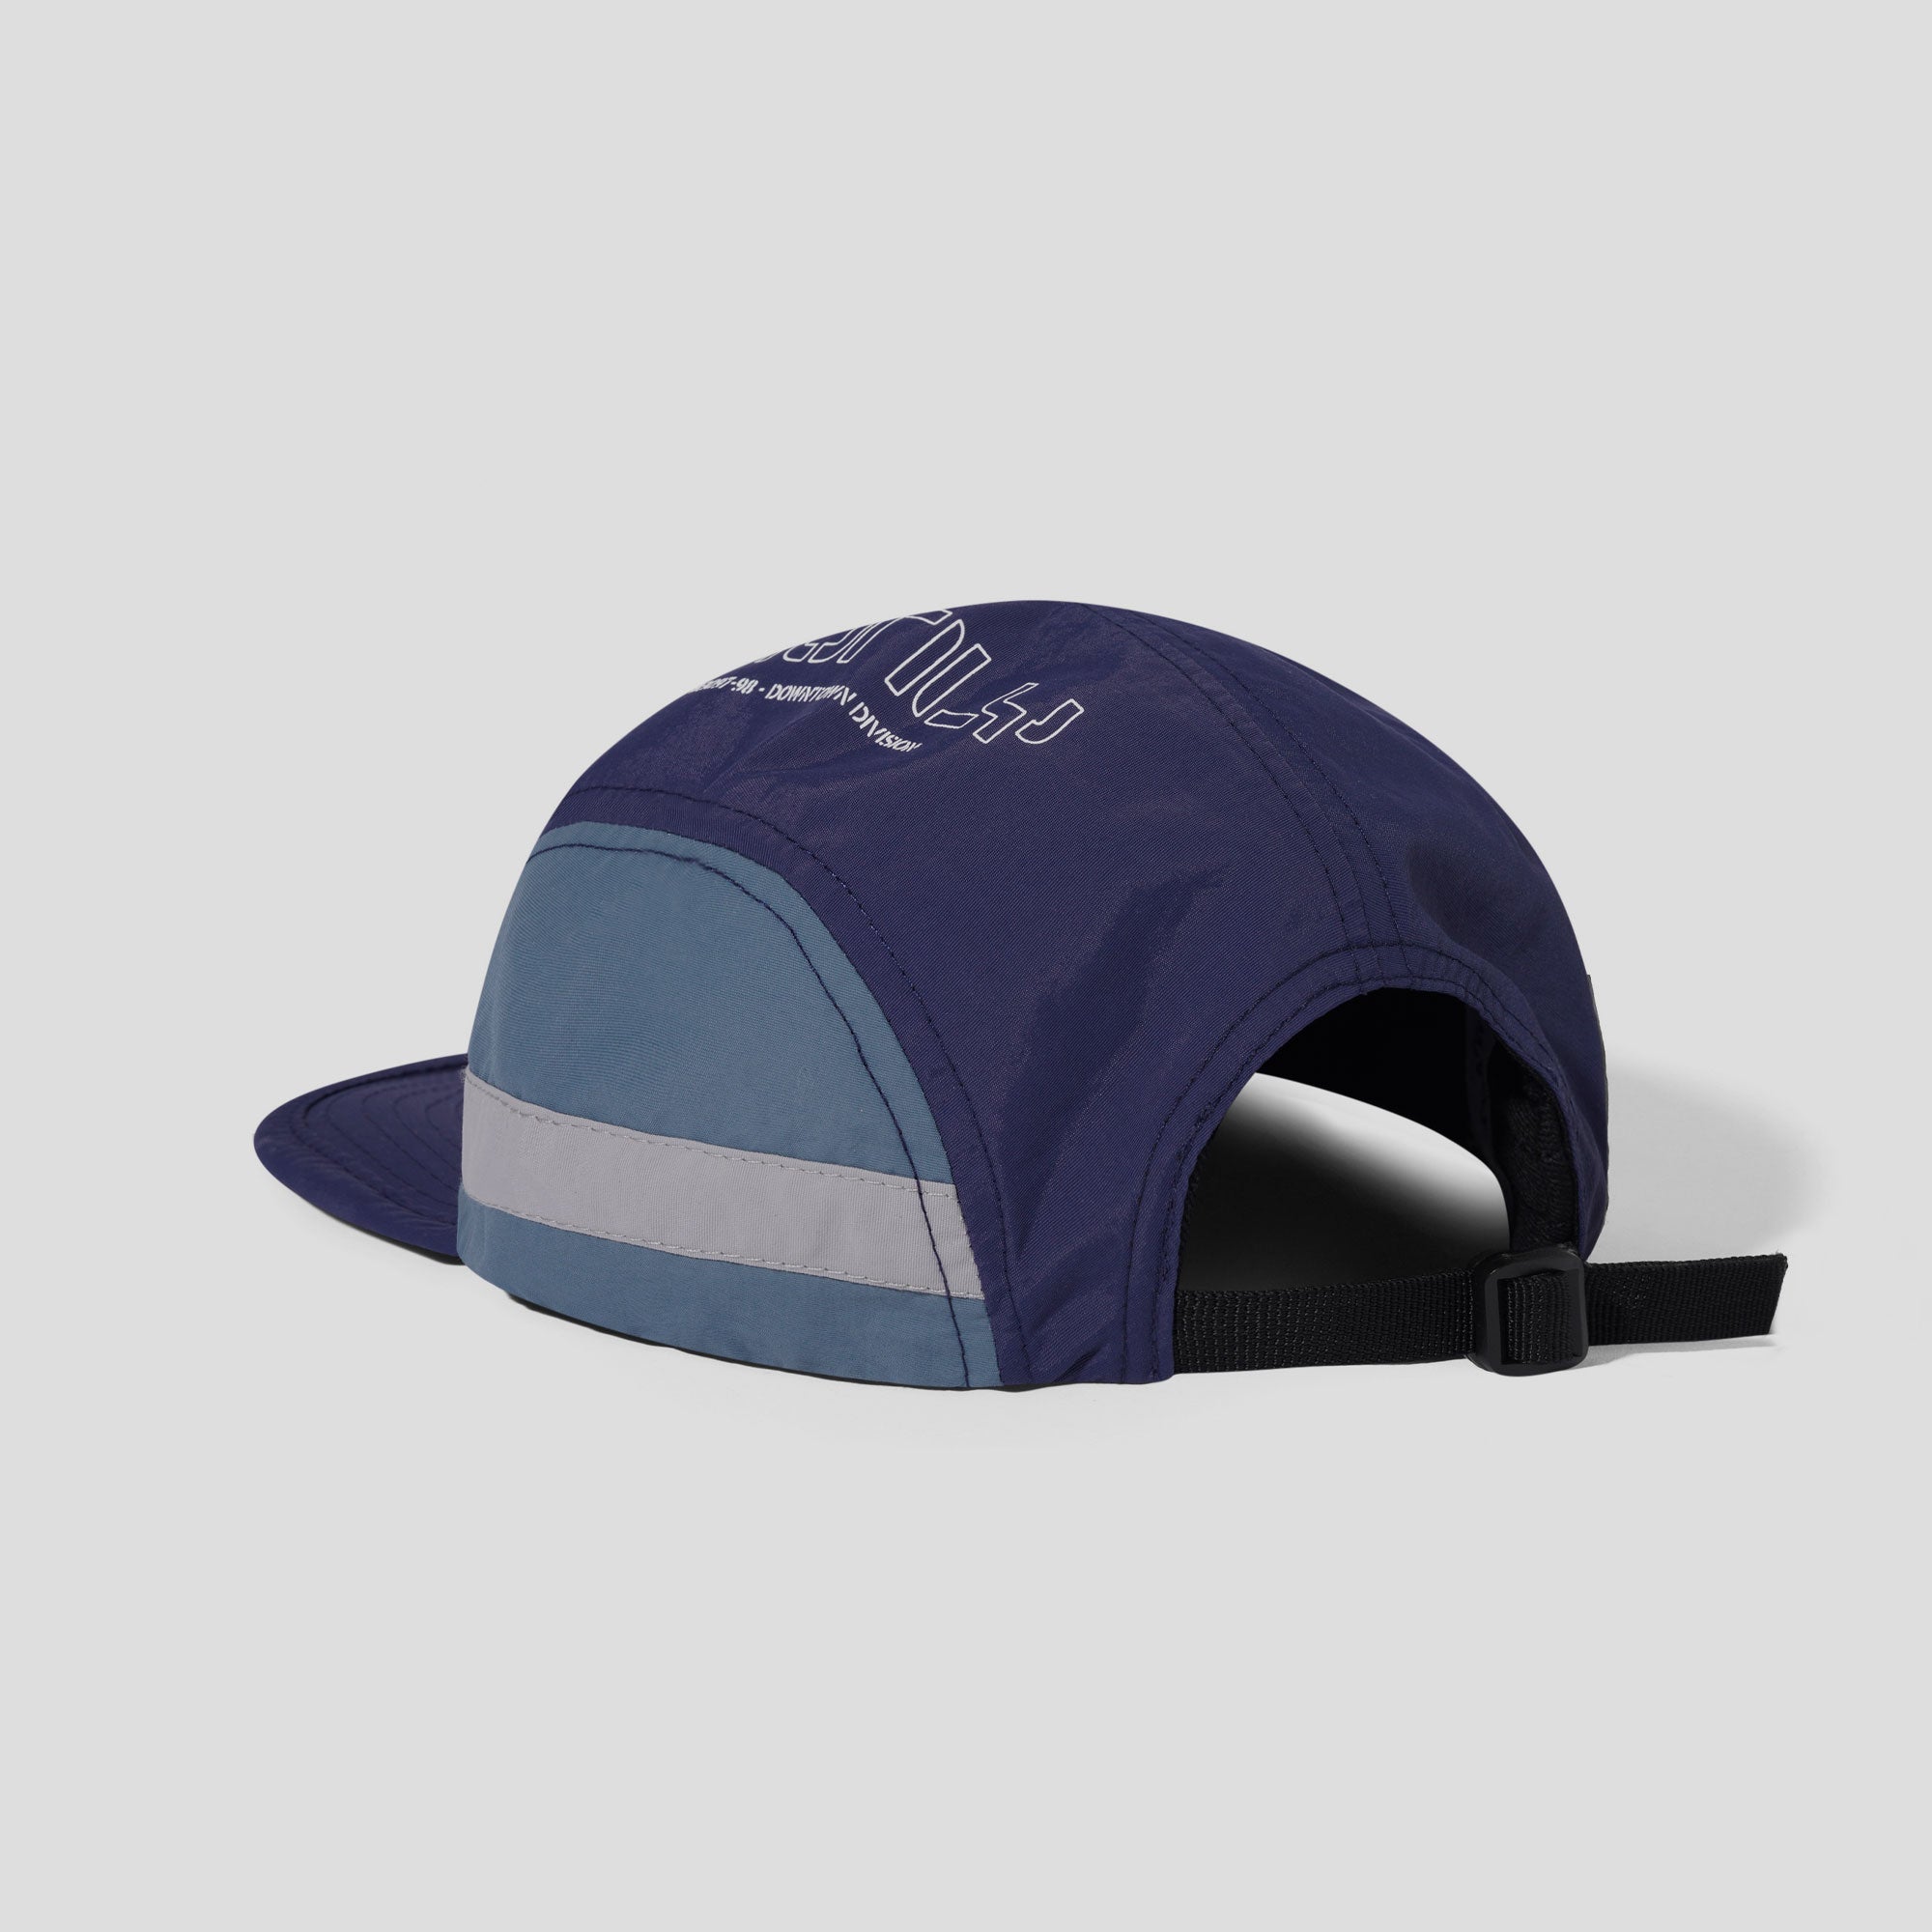 Cash Only All Weather 4 Panel Cap - Navy